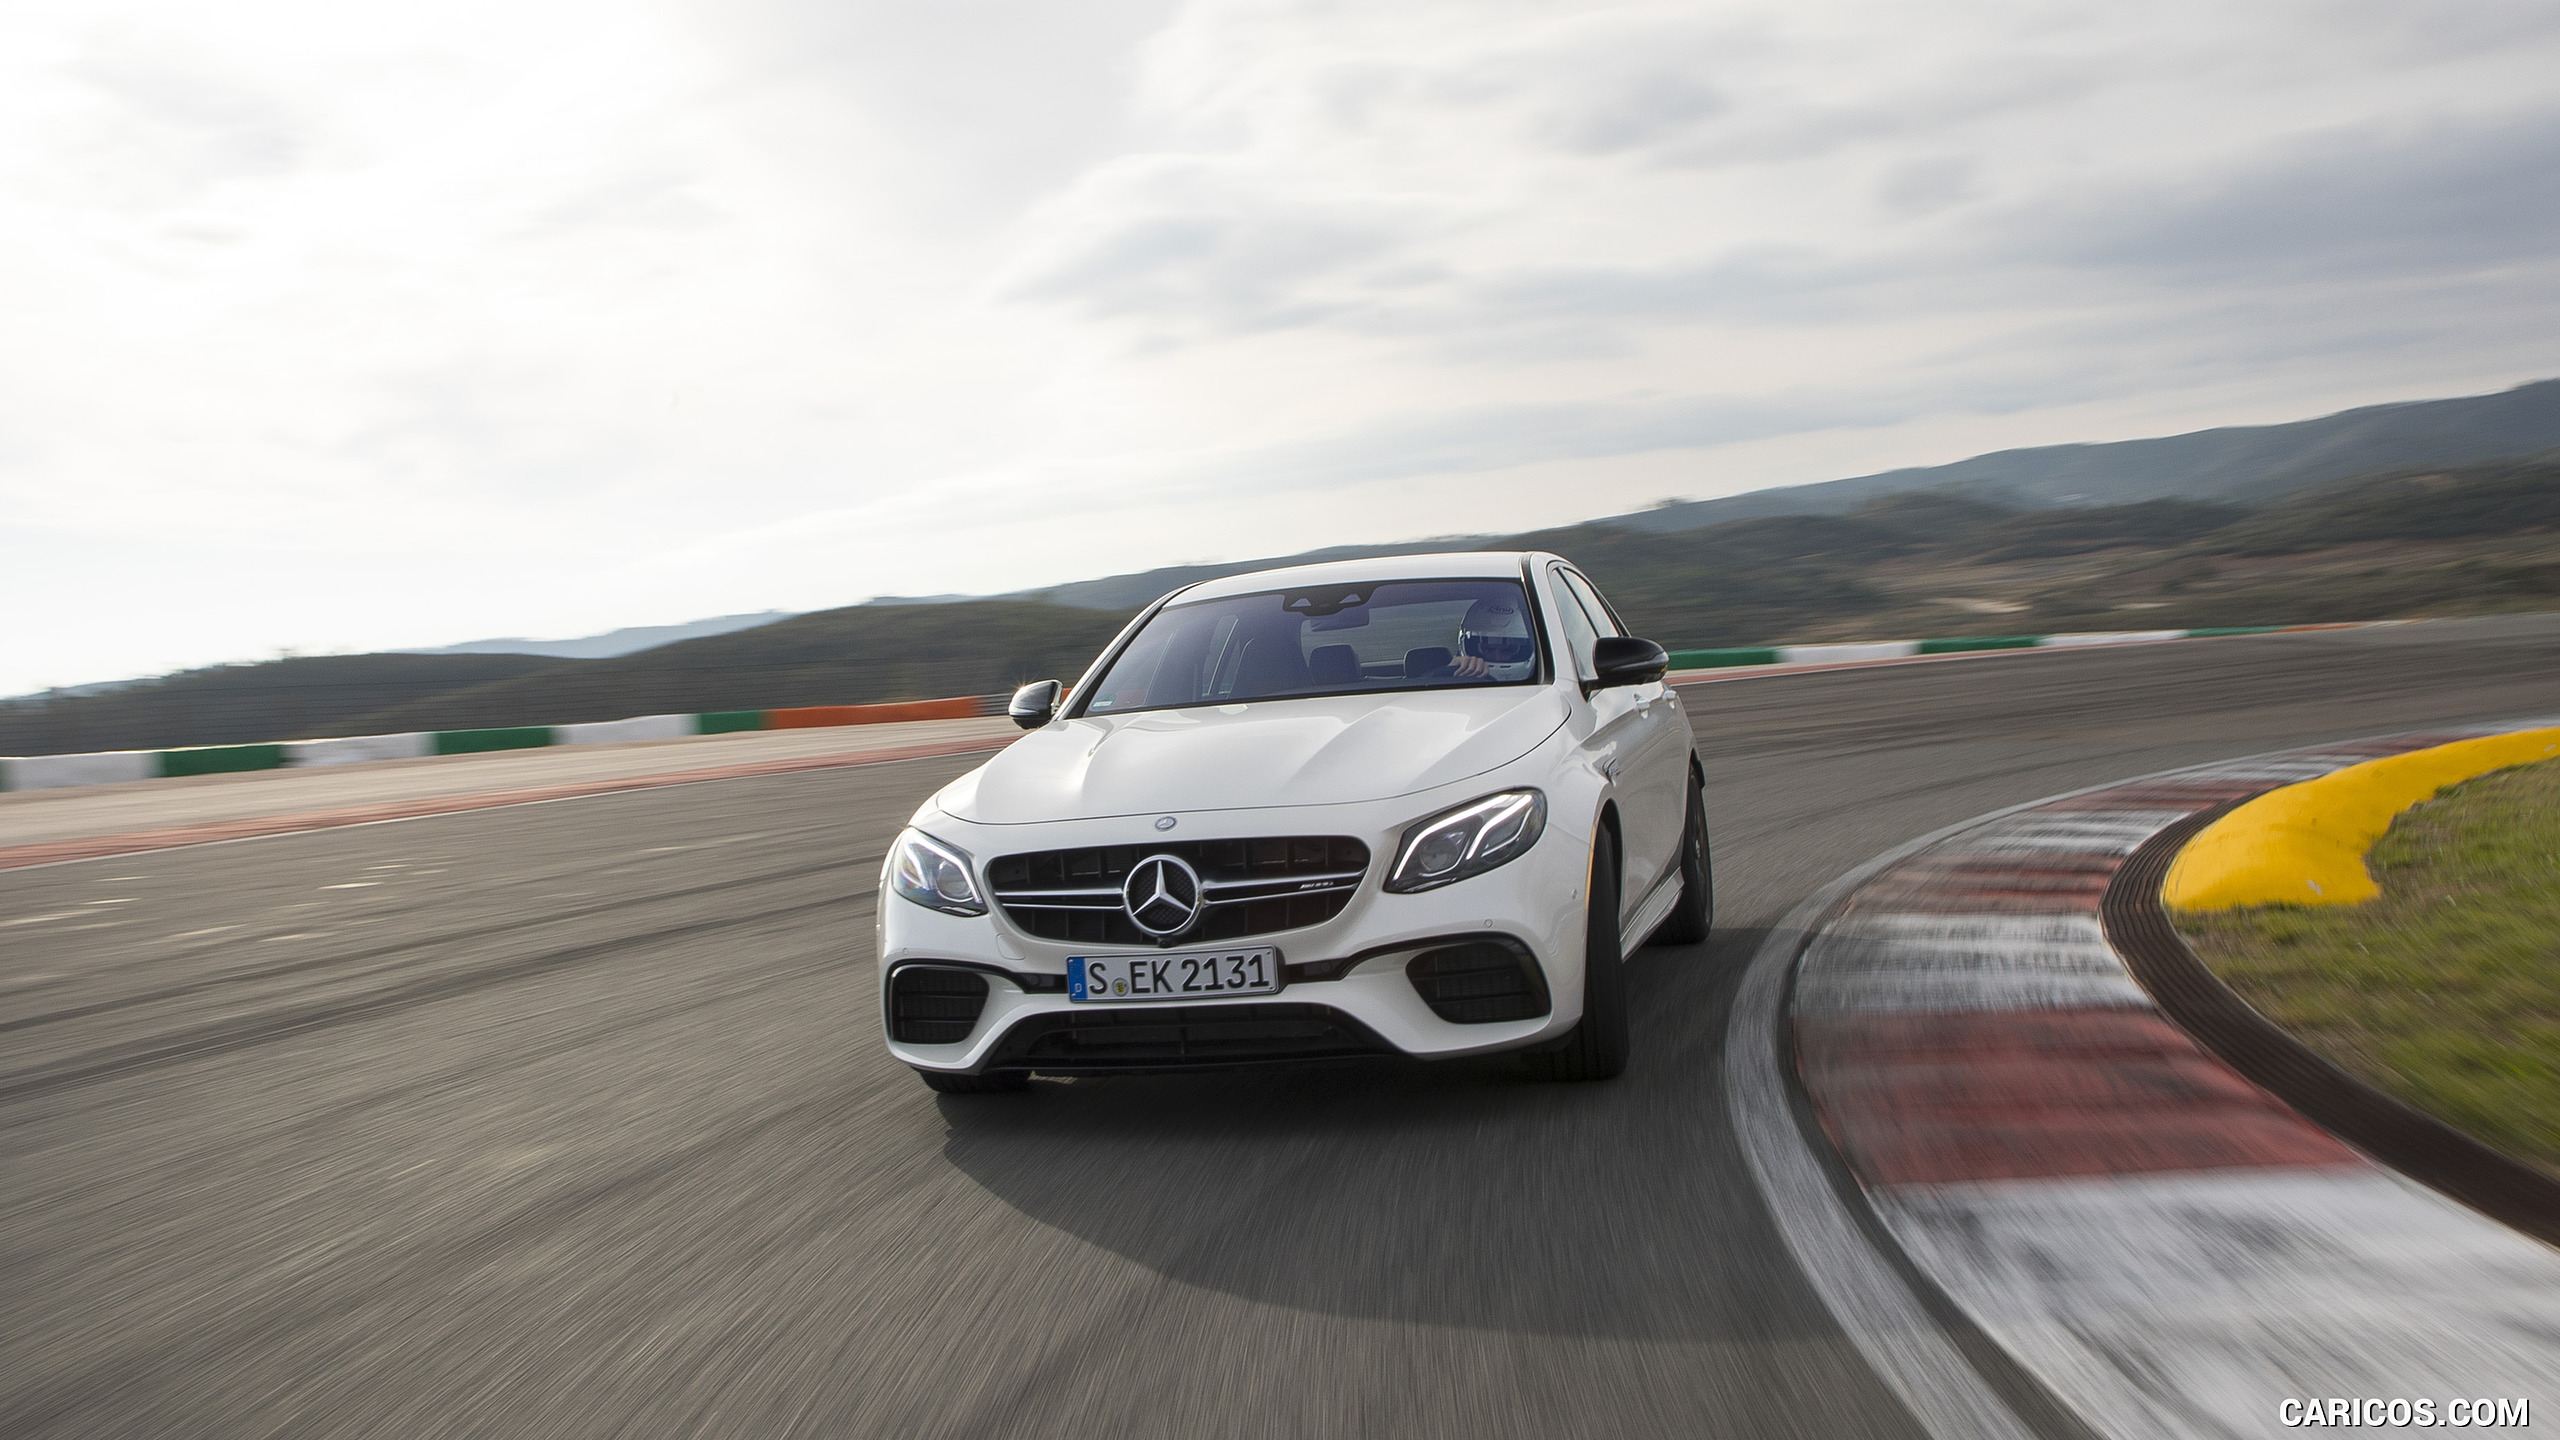 2018 Mercedes-AMG E63 S 4MATIC+ - Front, #94 of 323